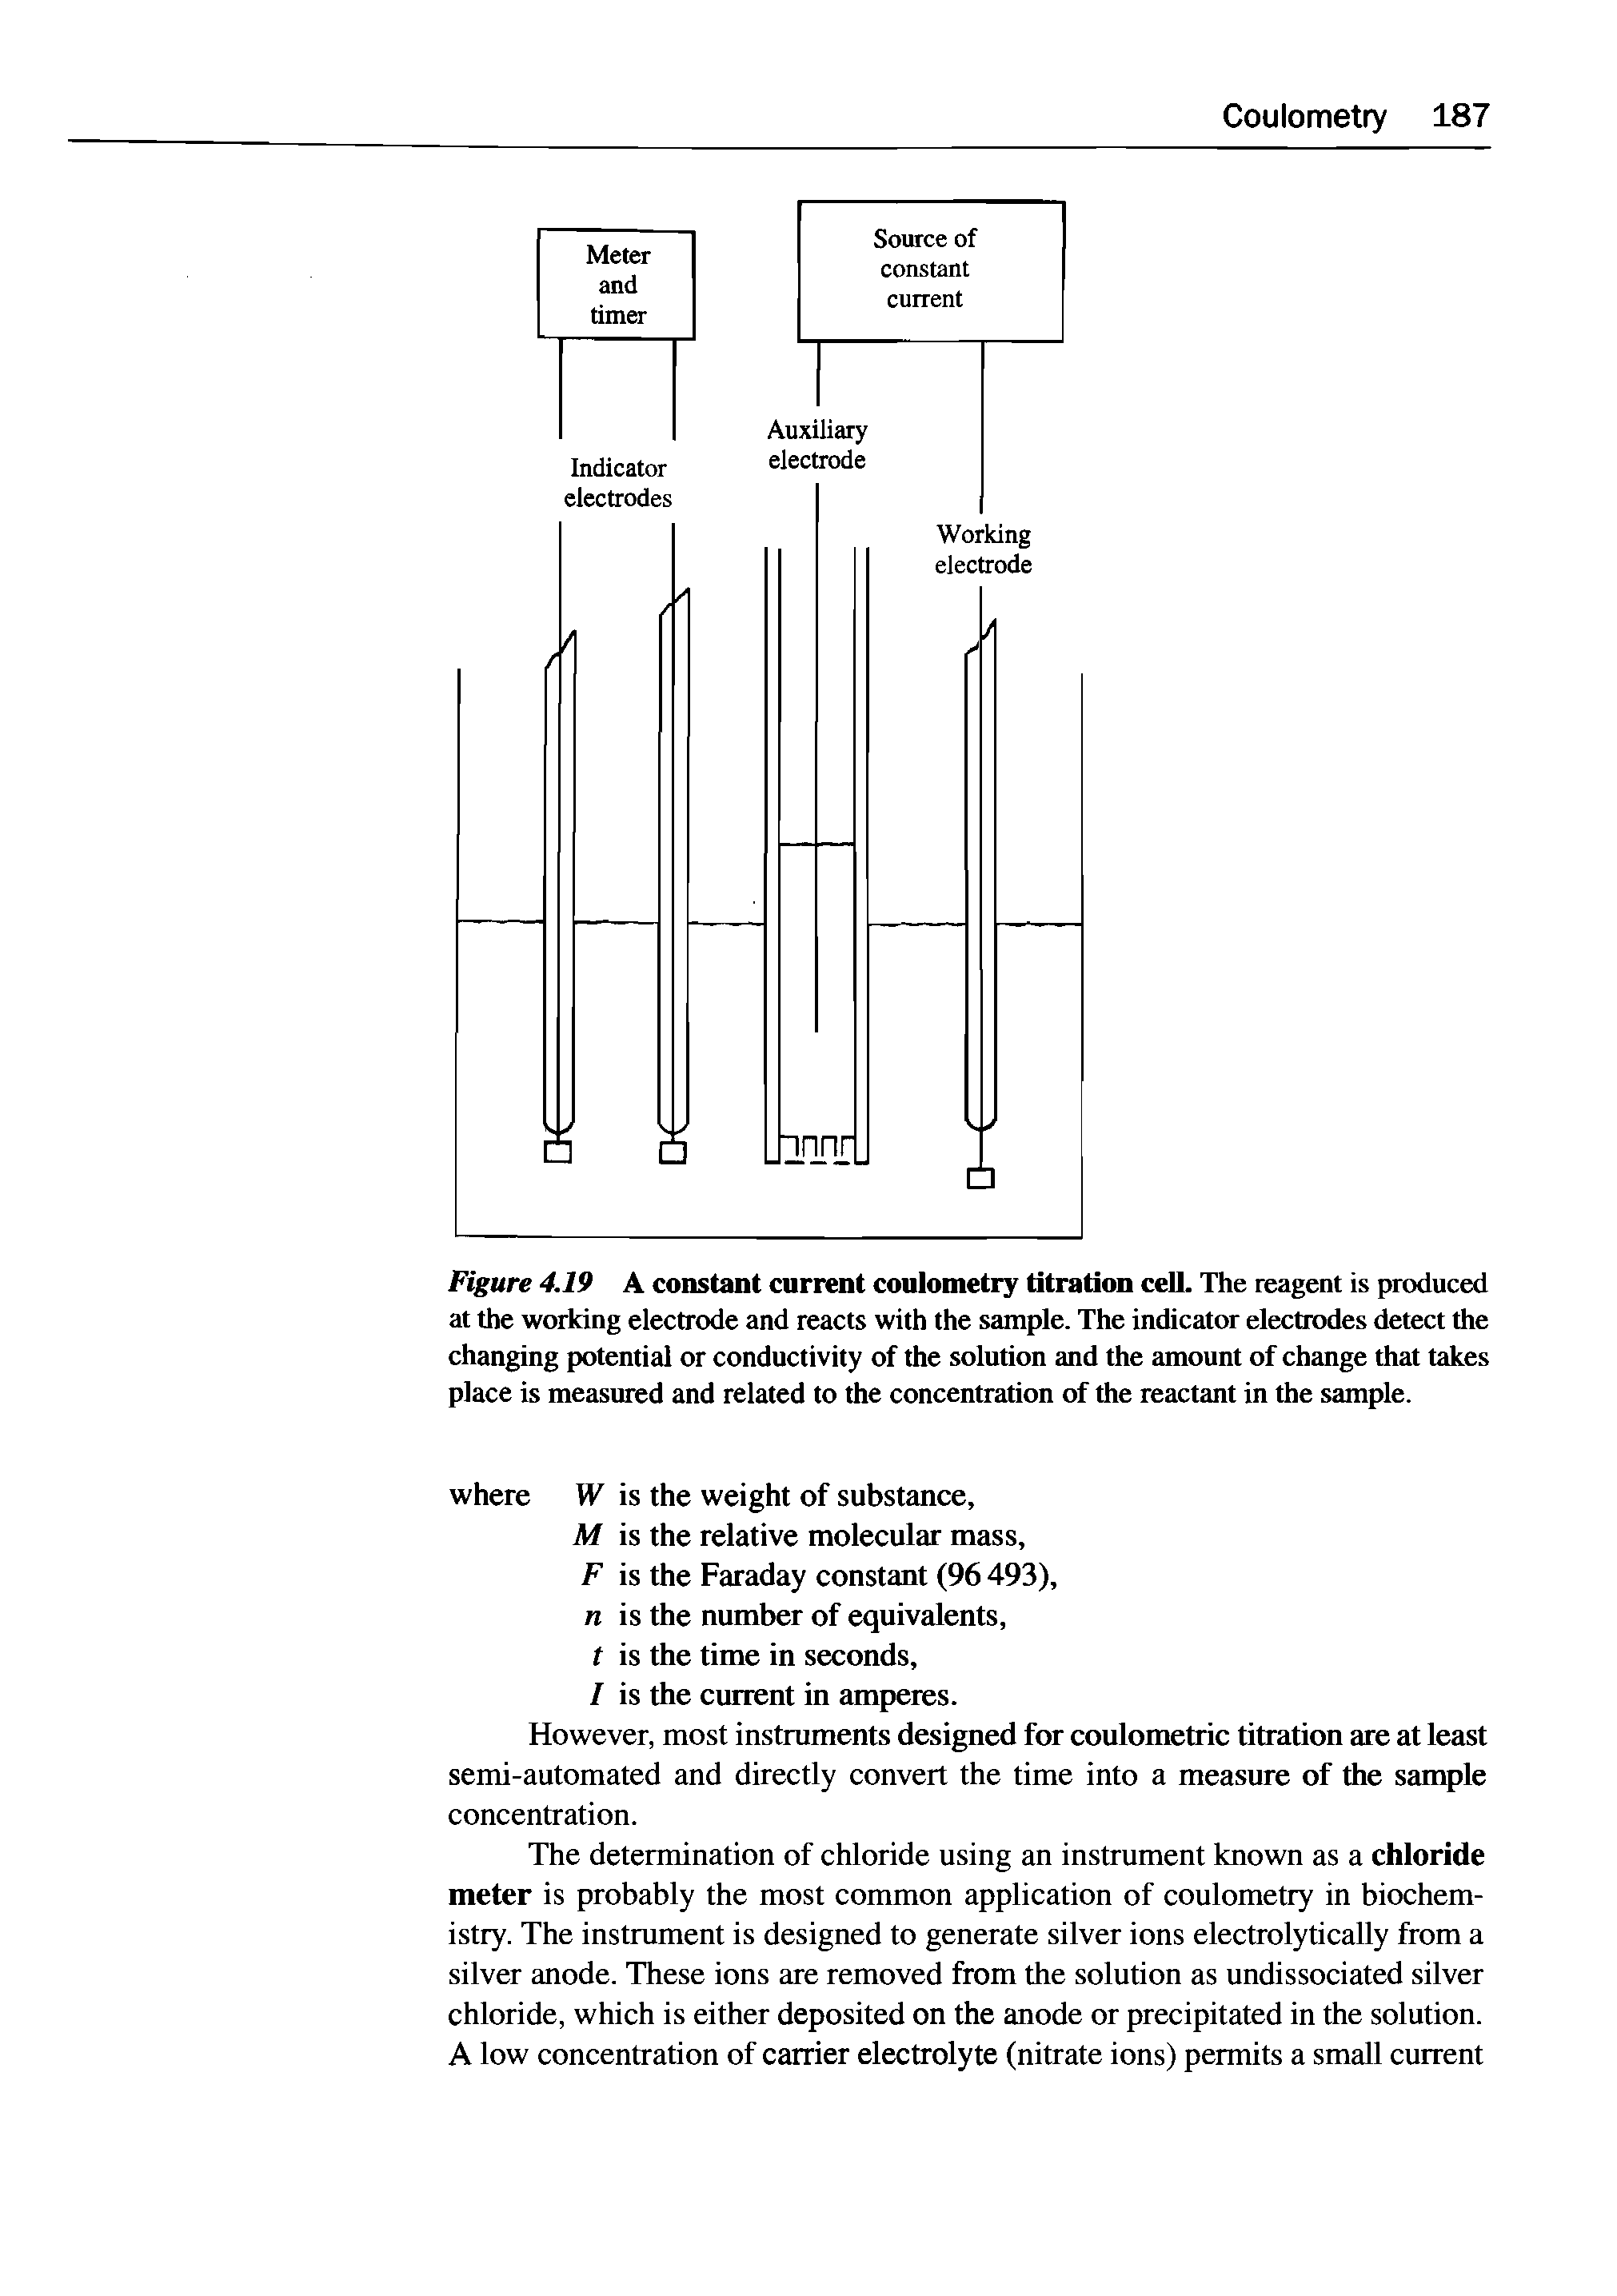 Figure 4.19 A constant current coulometry titration cell. The reagent is produced at the working electrode and reacts with the sample. The indicator electrodes detect the changing potential or conductivity of the solution and the amount of change that takes place is measured and related to the concentration of the reactant in the sample.